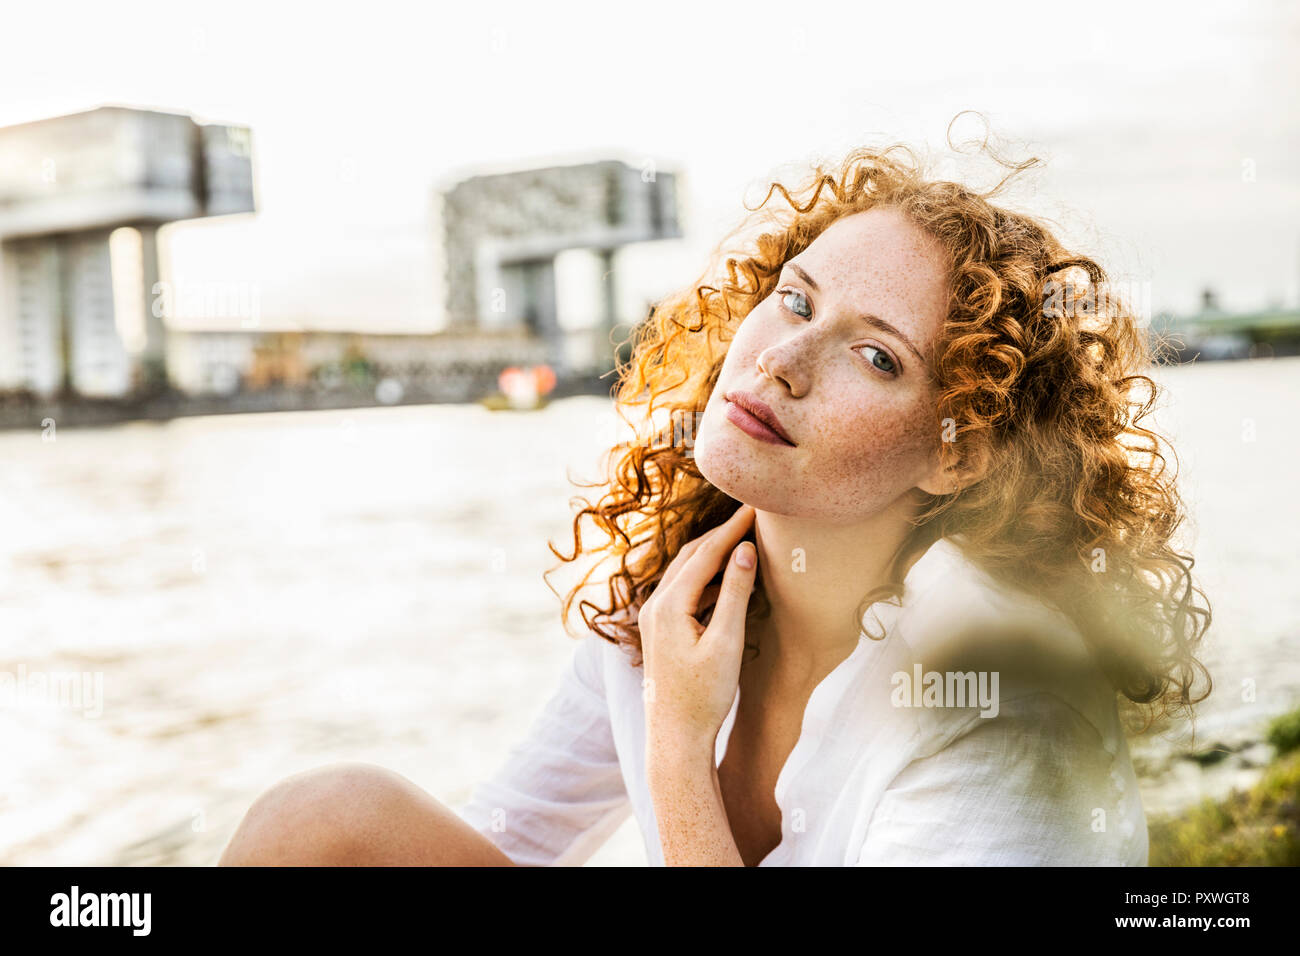 Germany, Cologne, portrait of freckled young woman with curly red hair Stock Photo